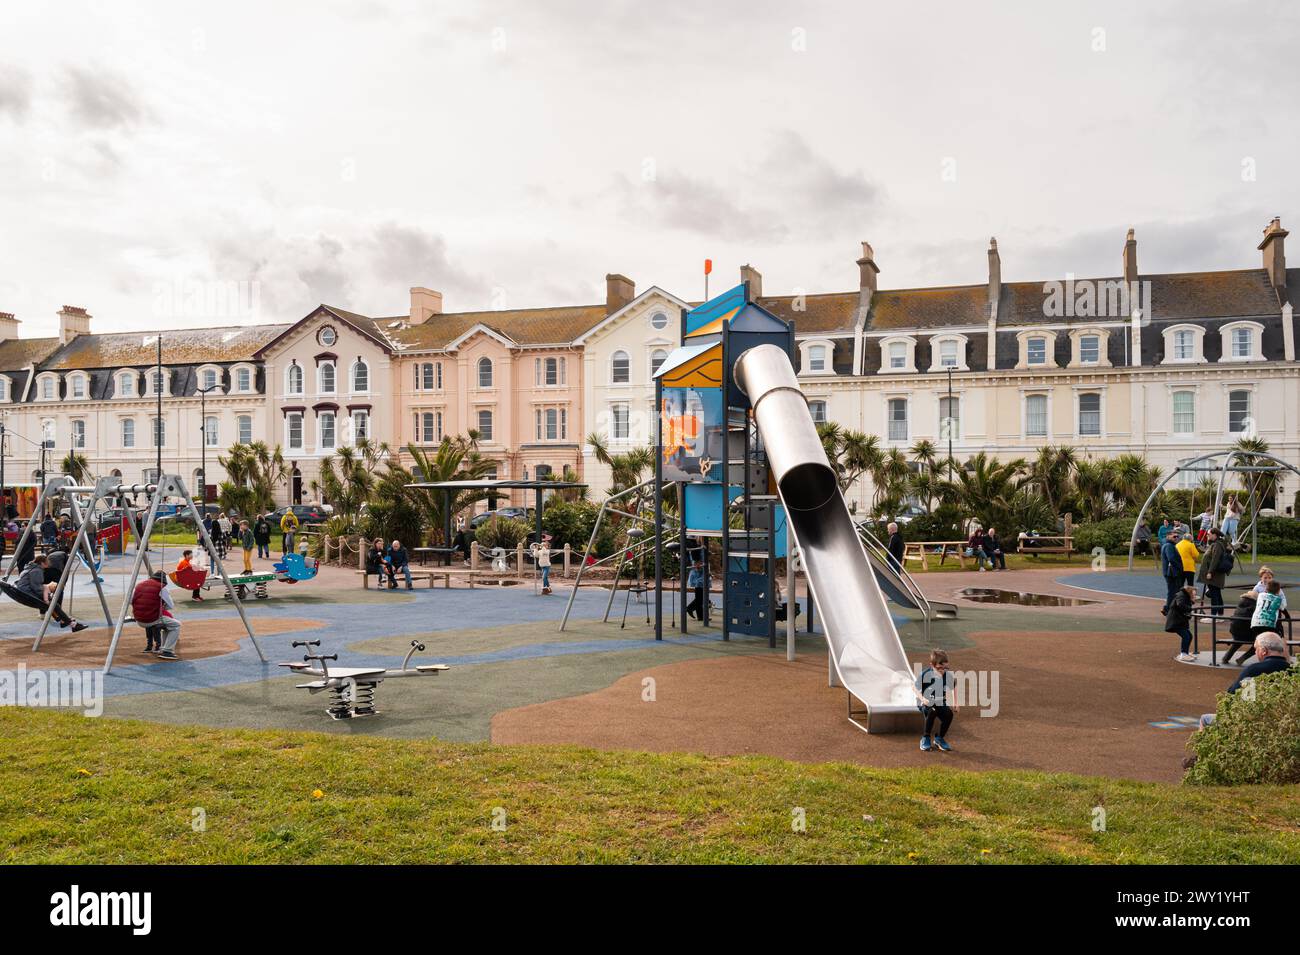 Children's play area with slides, swings and climbing frames in Teignmouth, Devon, UK. Stock Photo